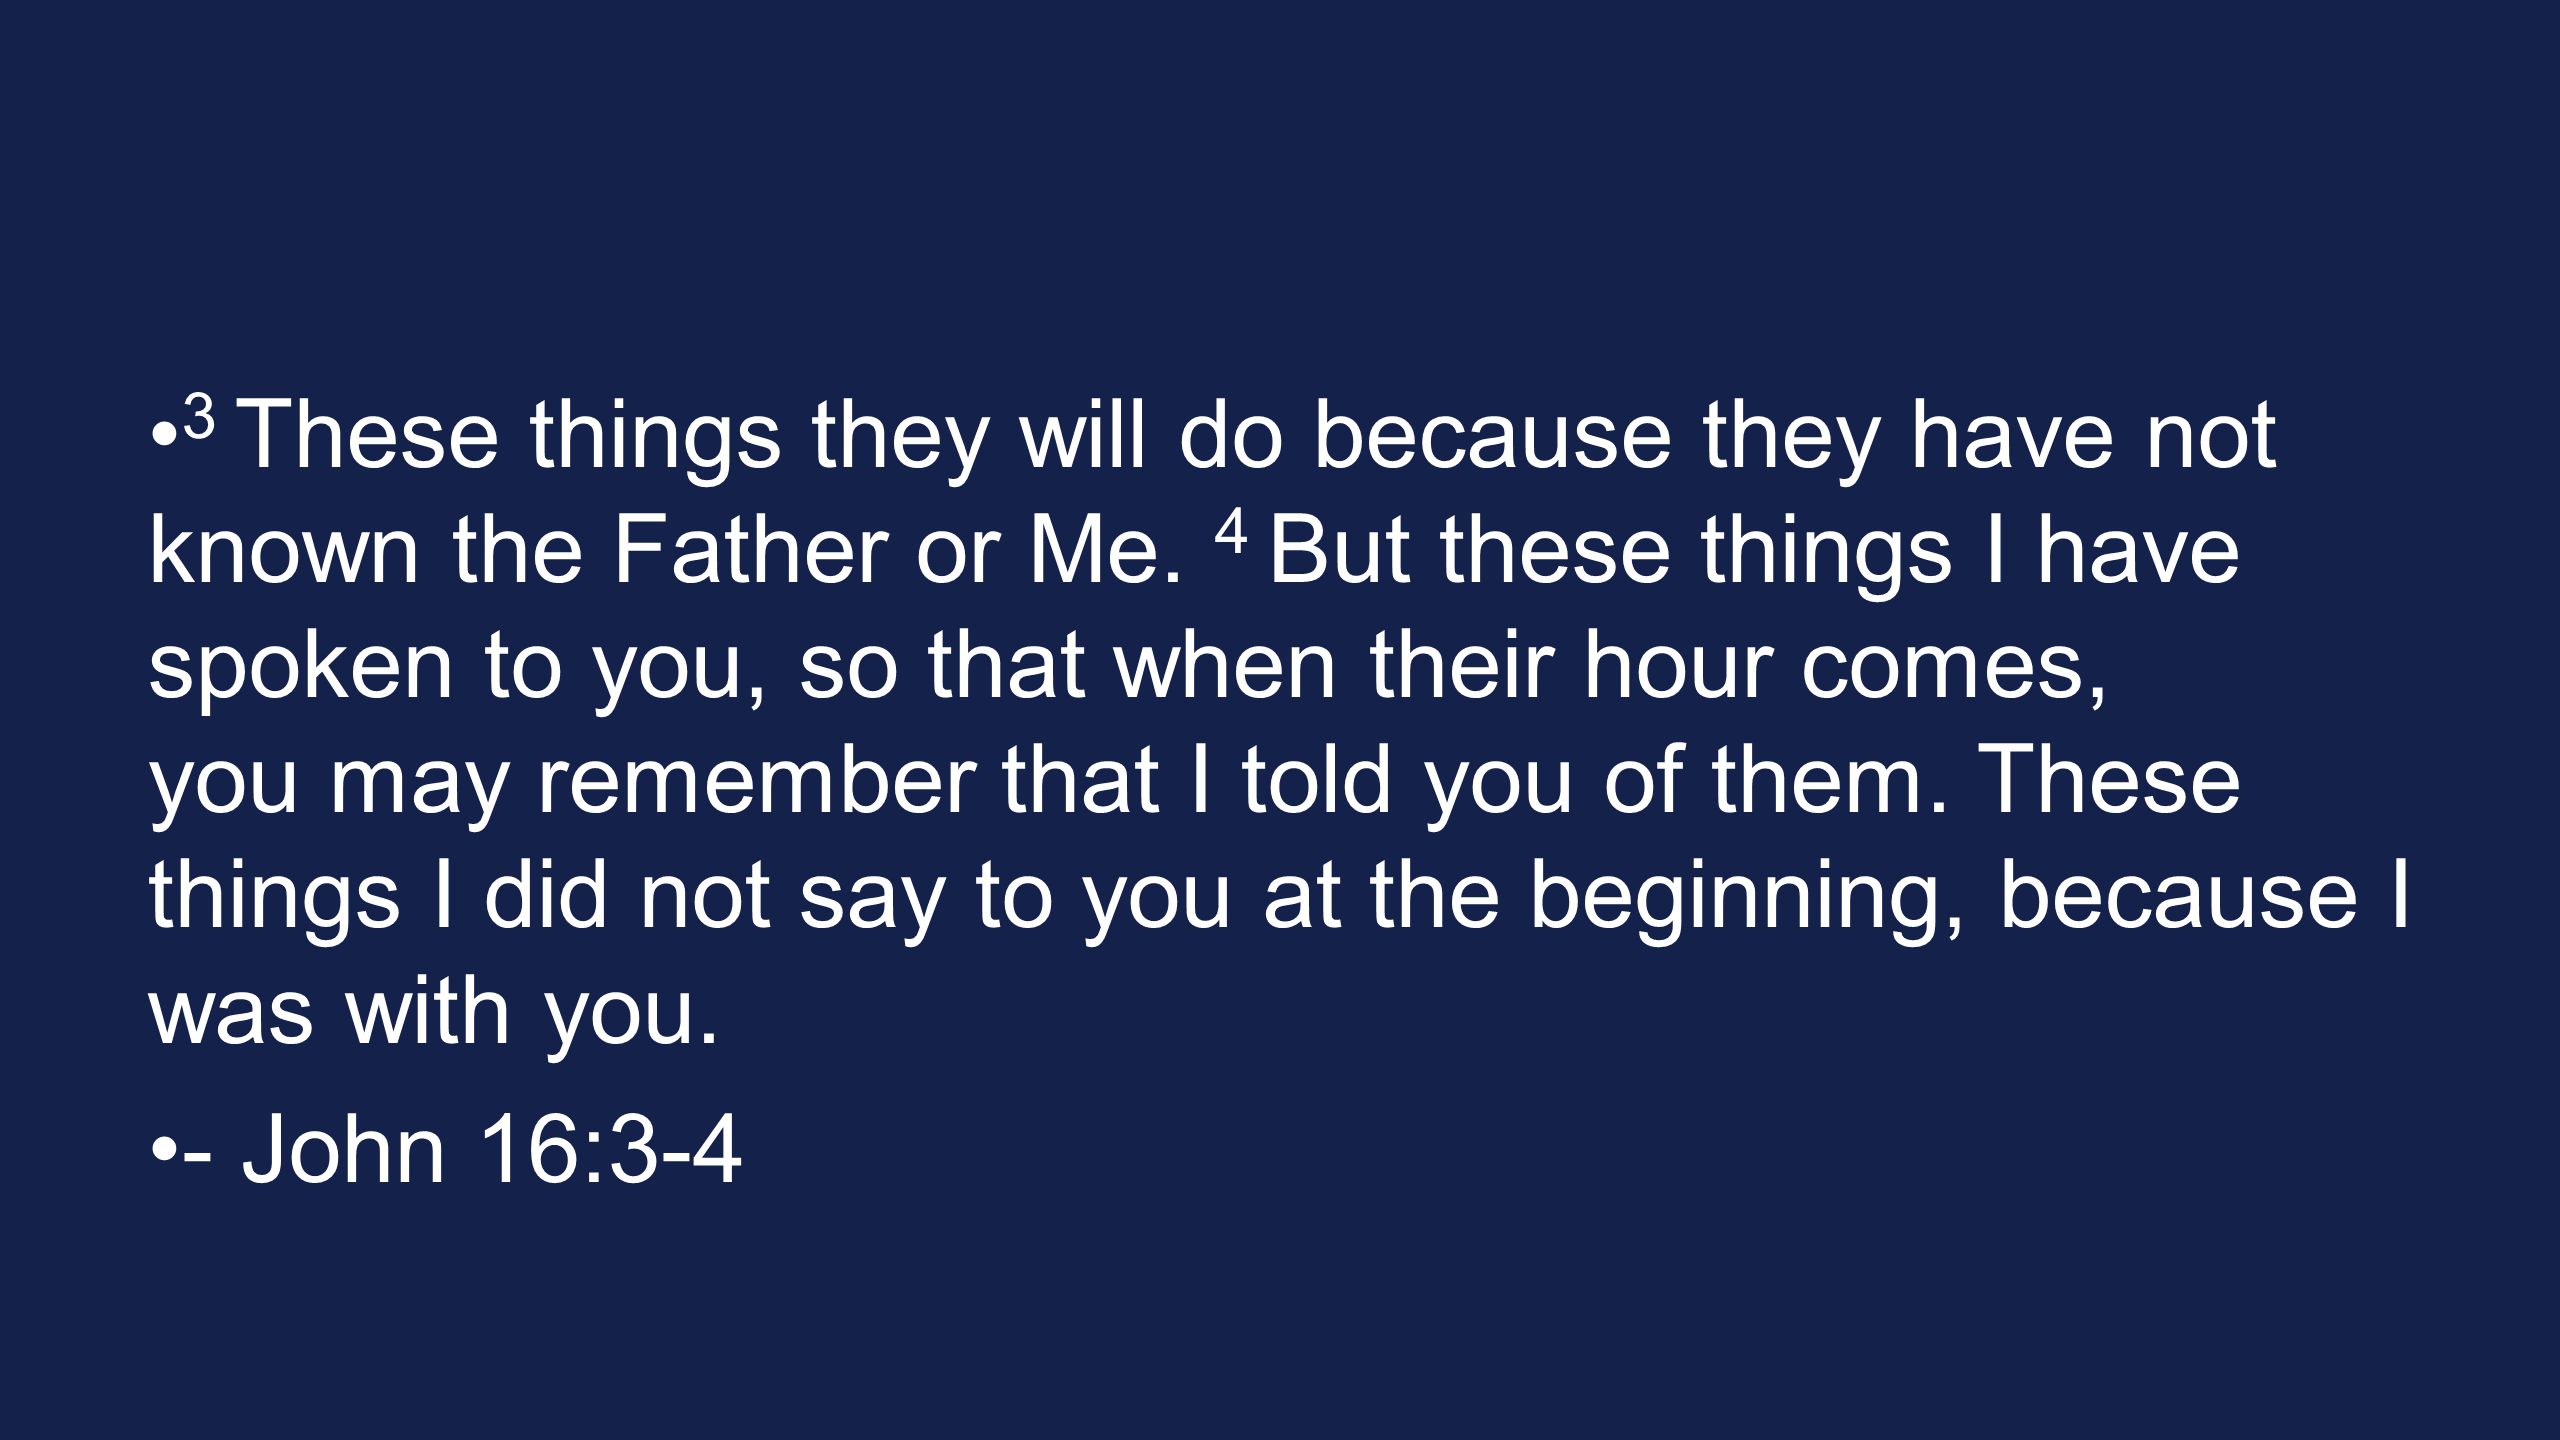 3 These things they will do because they have not known the Father or Me.